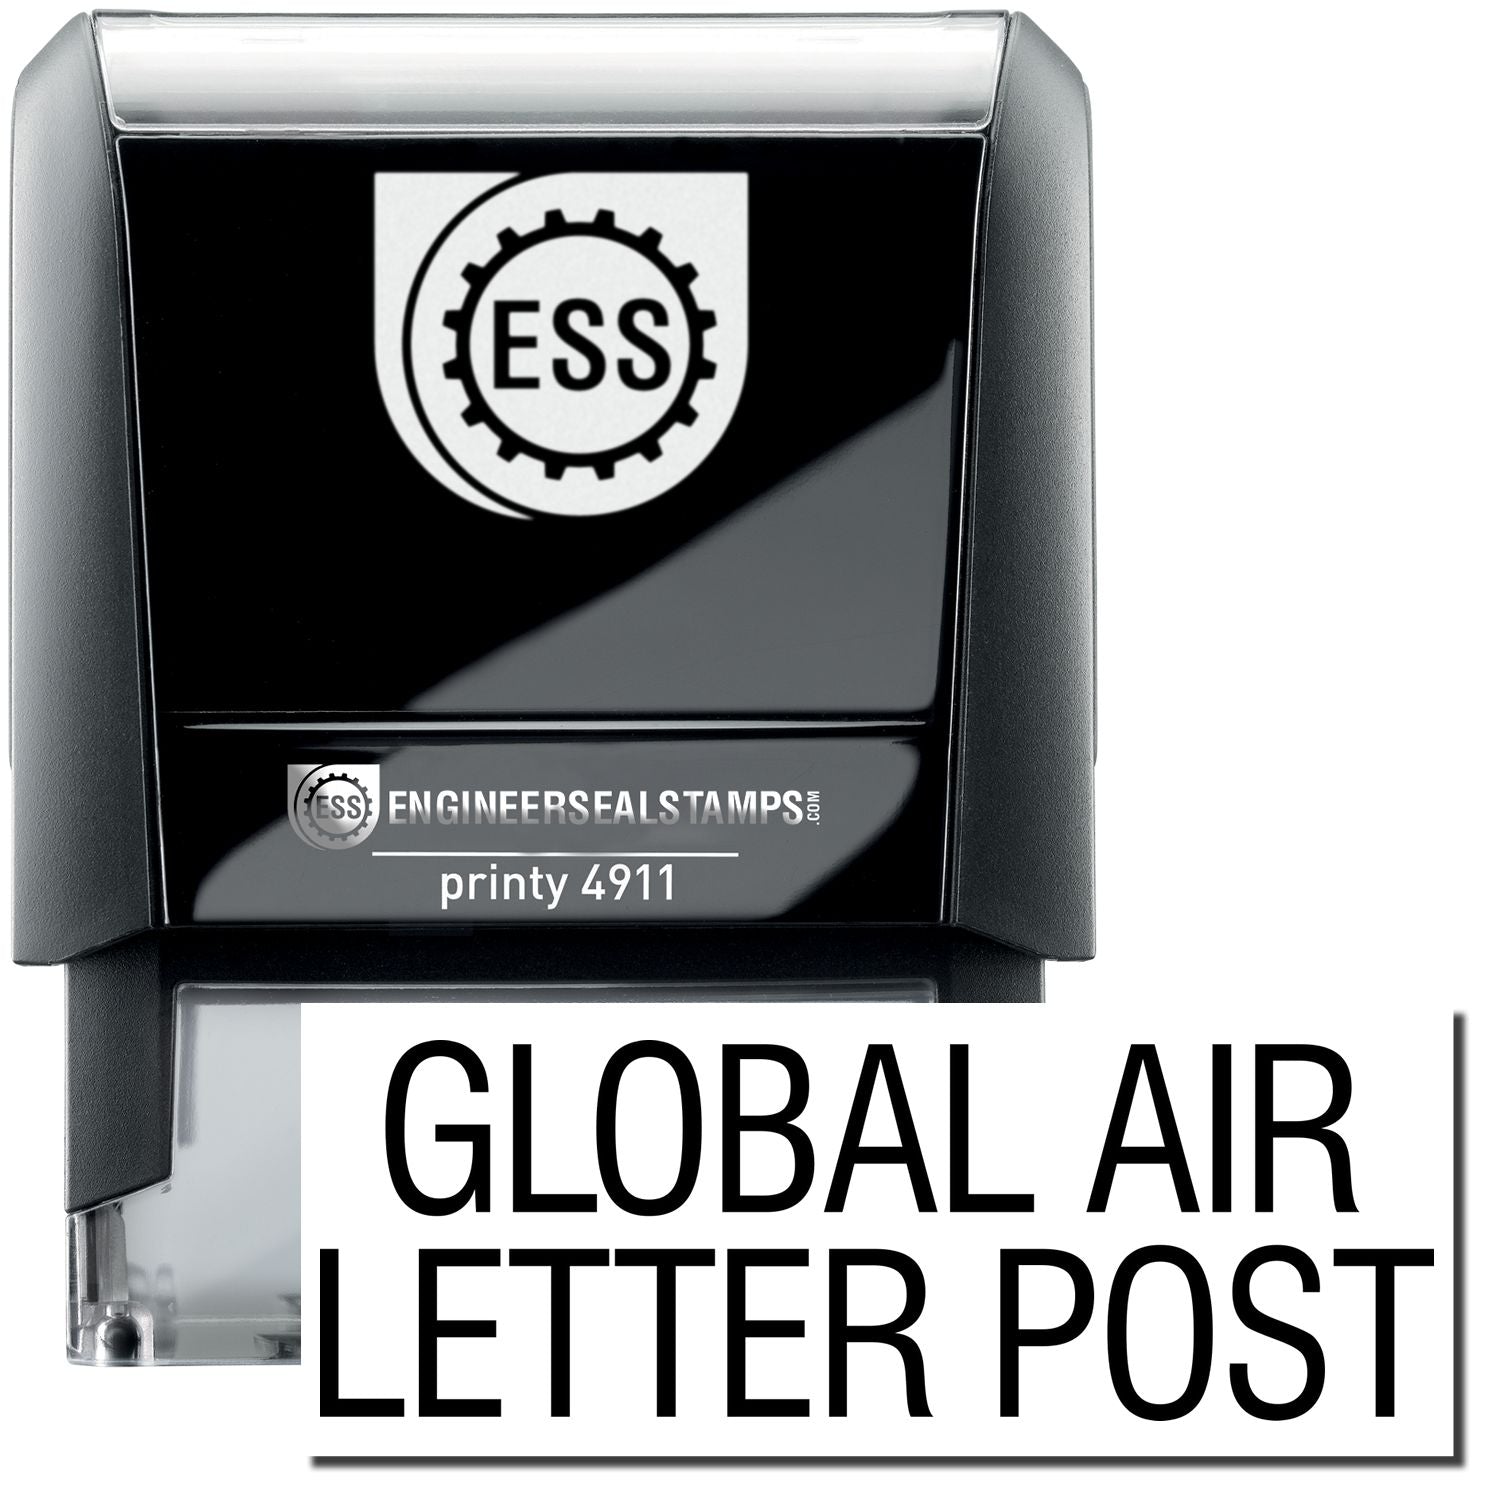 A self-inking stamp with a stamped image showing how the text "GLOBAL AIR LETTER POST" is displayed after stamping.